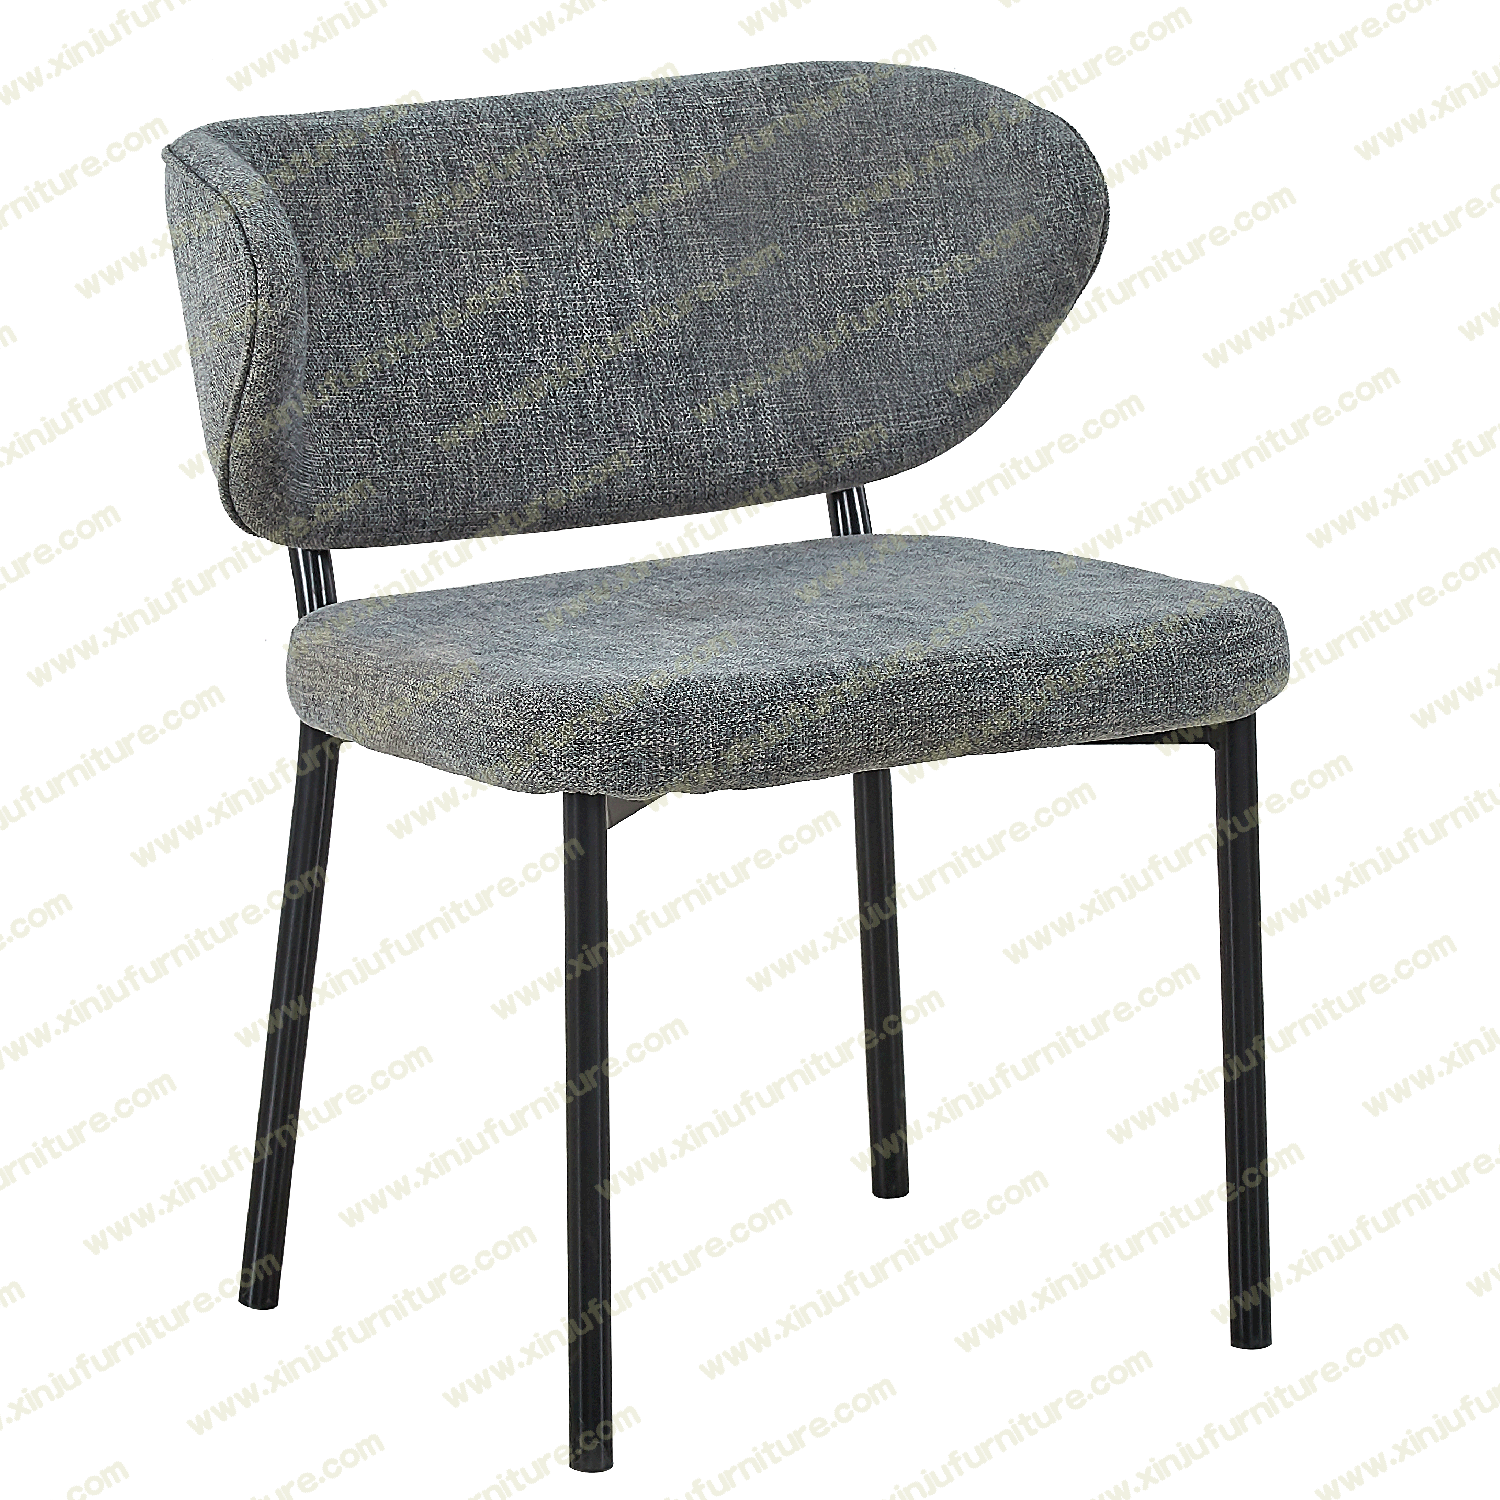 Comfortable backrest dining chair made of cotton and linen